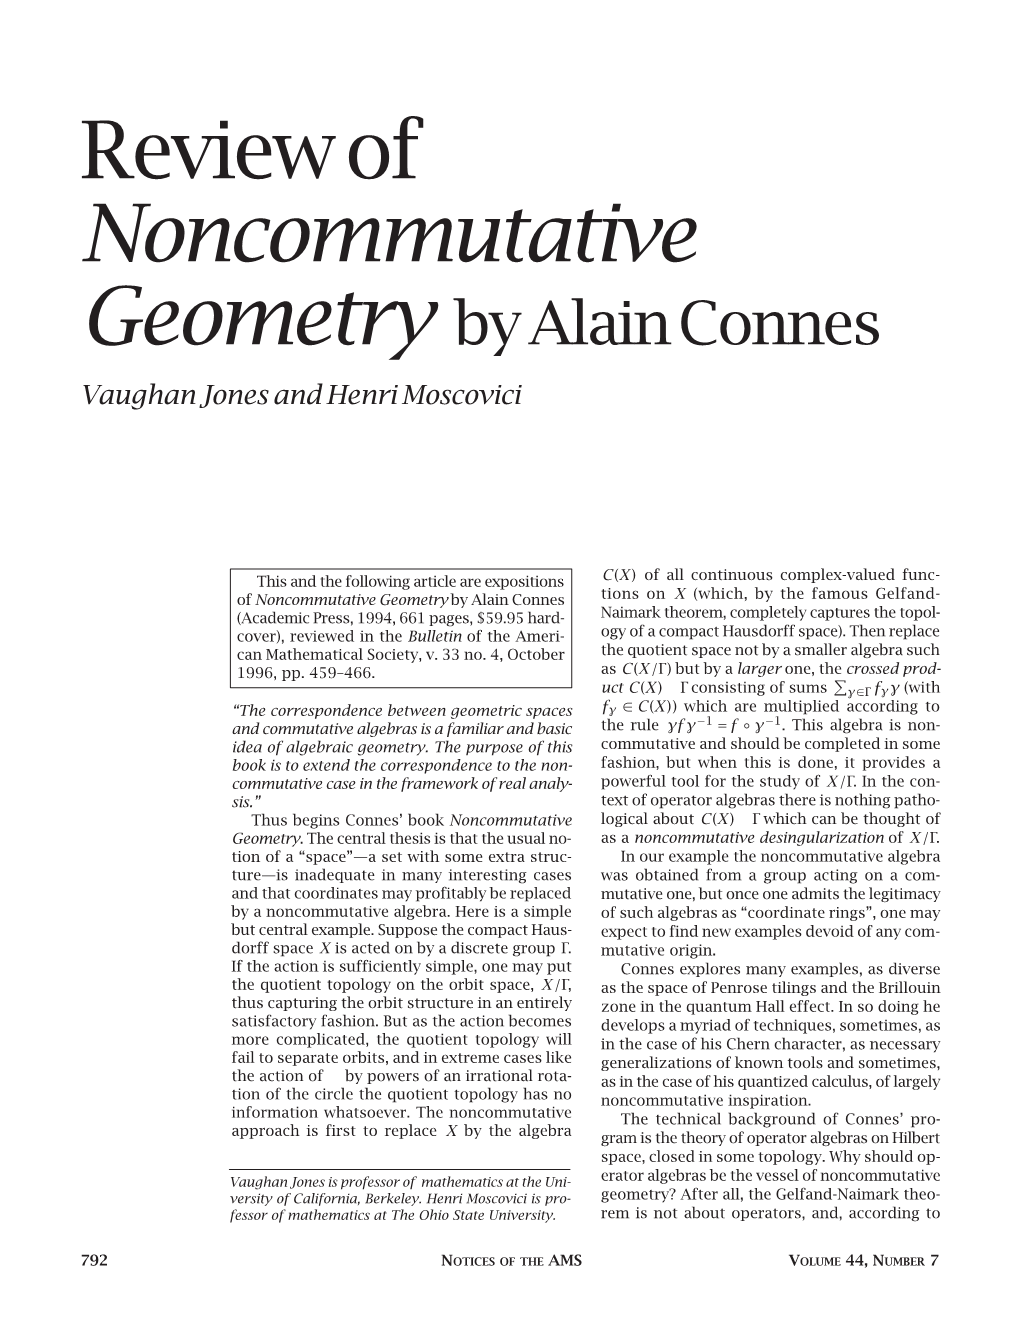 Review of Noncommutative Geometry by Alain Connes Vaughan Jones and Henri Moscovici